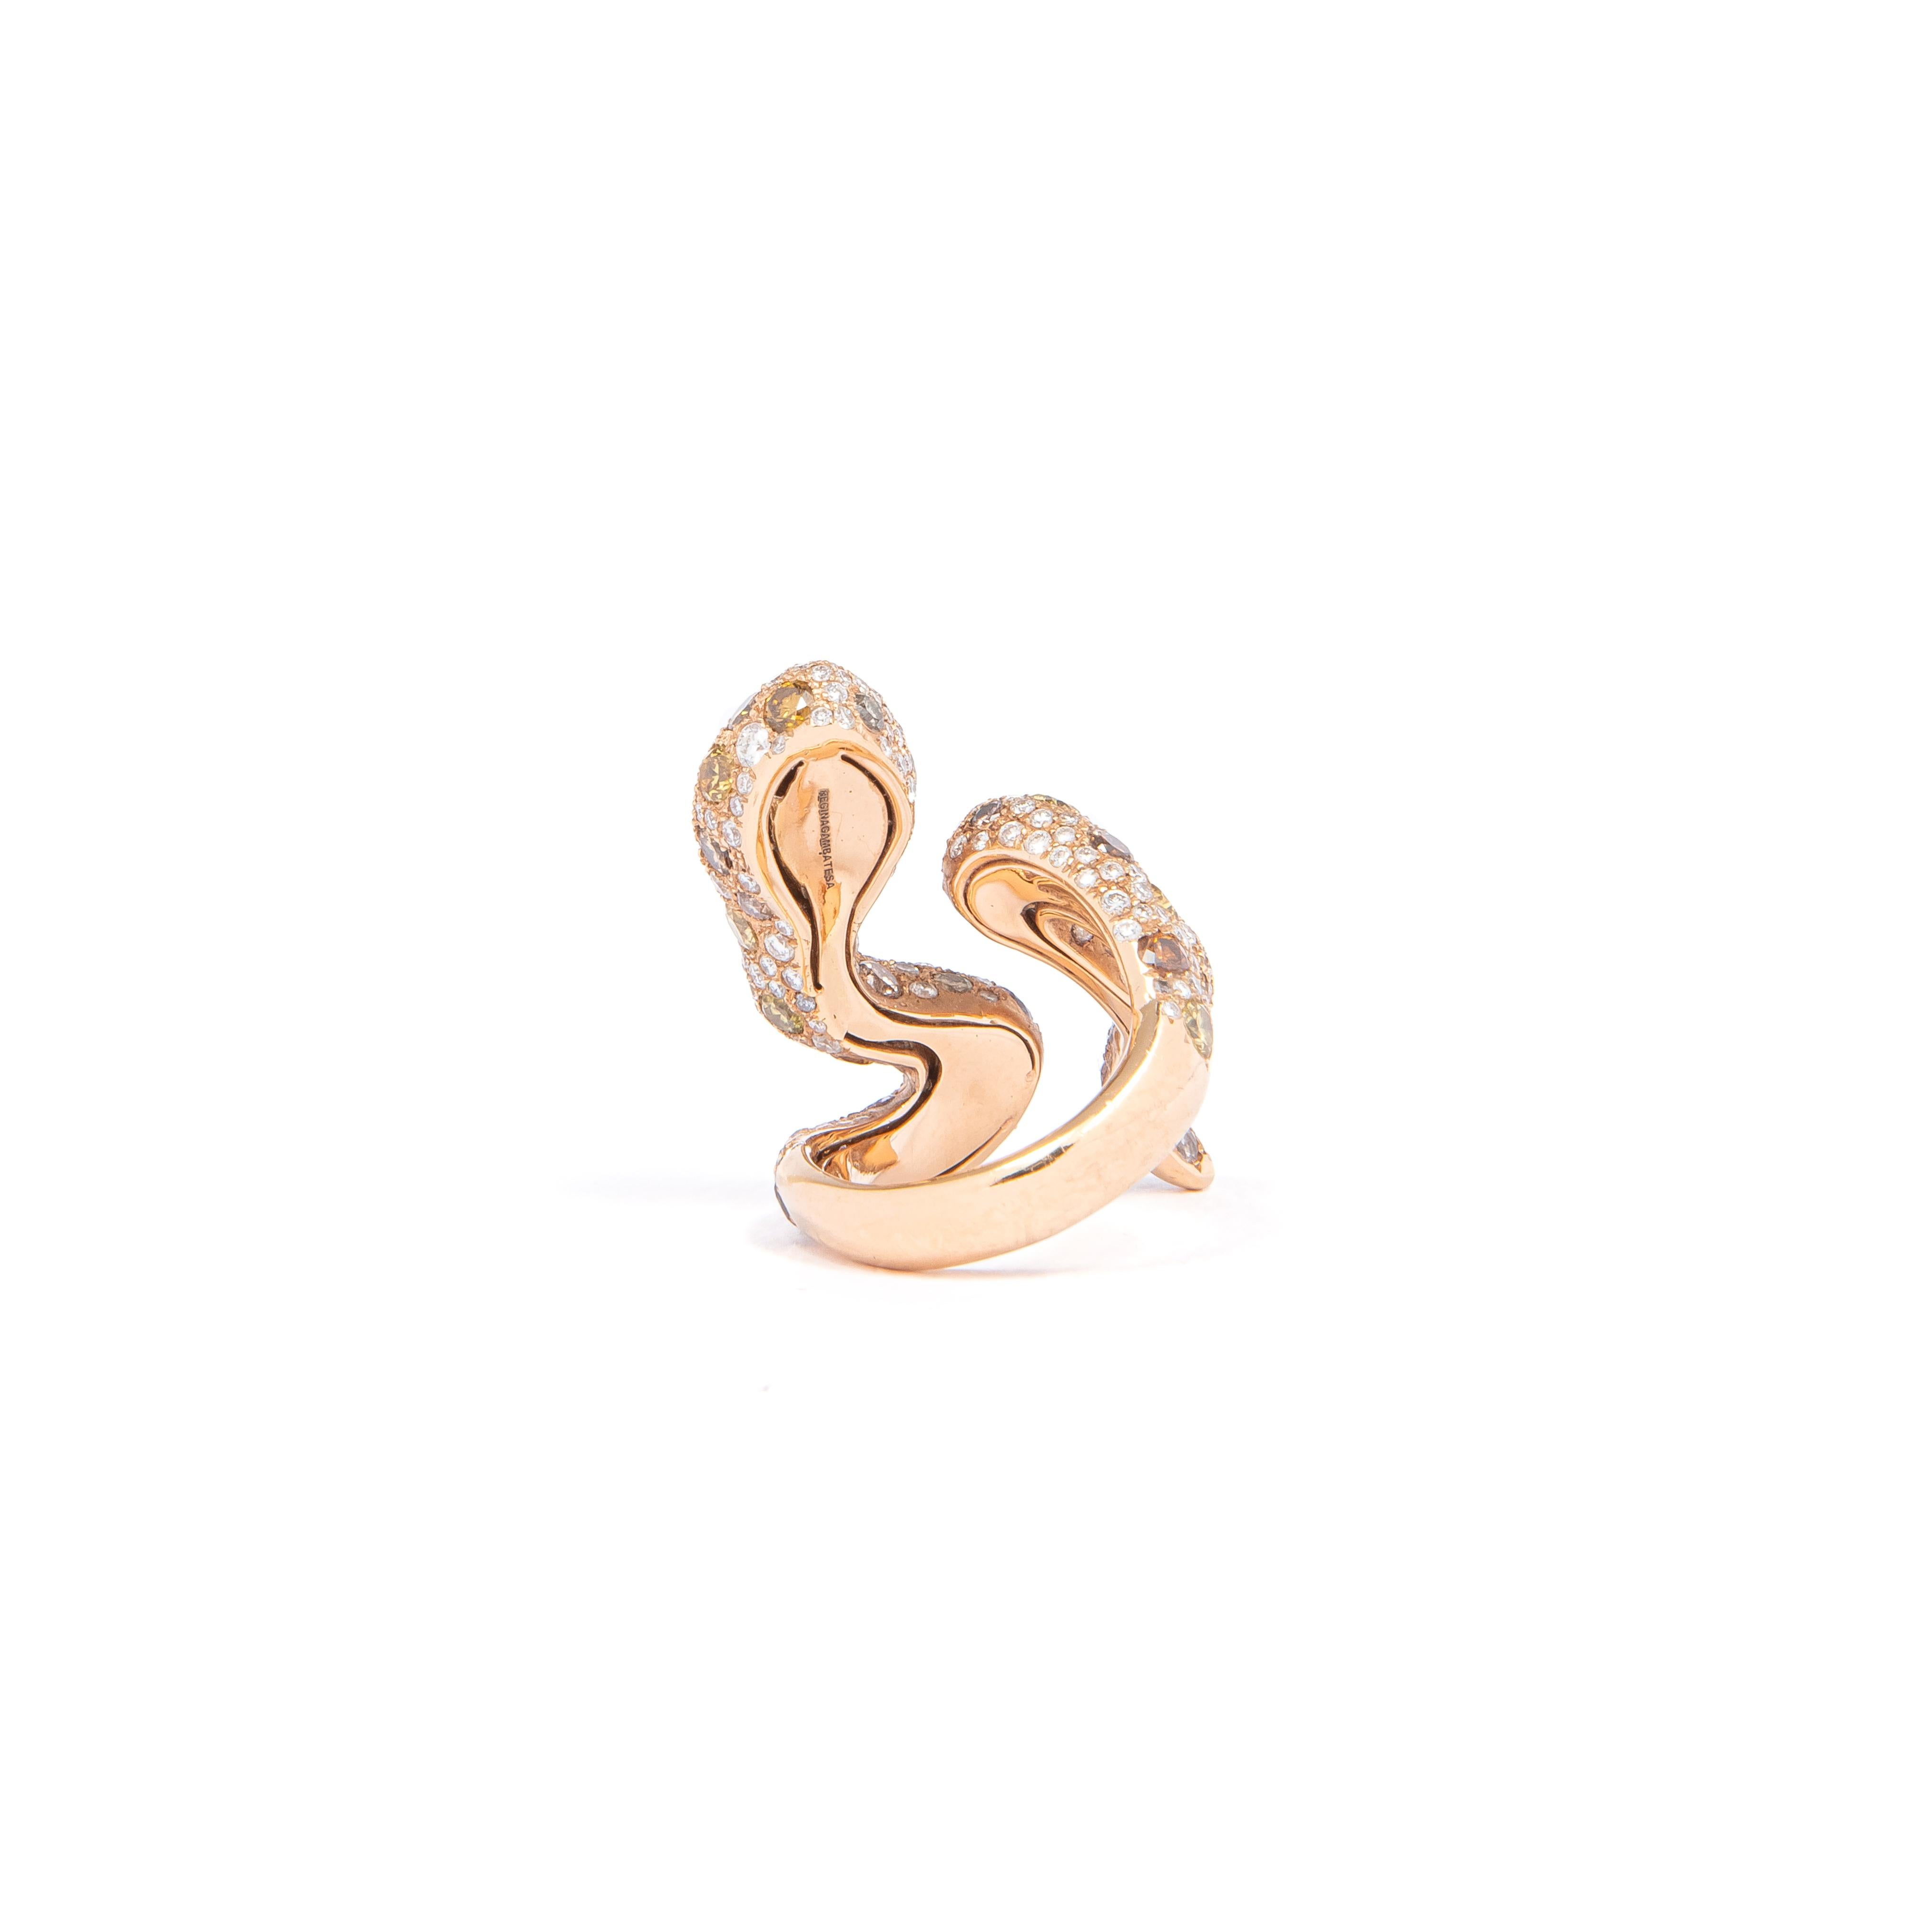 Amazing Snake ring in pink and gray gold with brilliant cut diamonds ct. 3,29, fancy diamonds ct. 5.13. The snake ring by Regina Gambatesa was createdin 1997 and it soon had an extraordinary success in Italy. This is a timeless one of a kind piece .